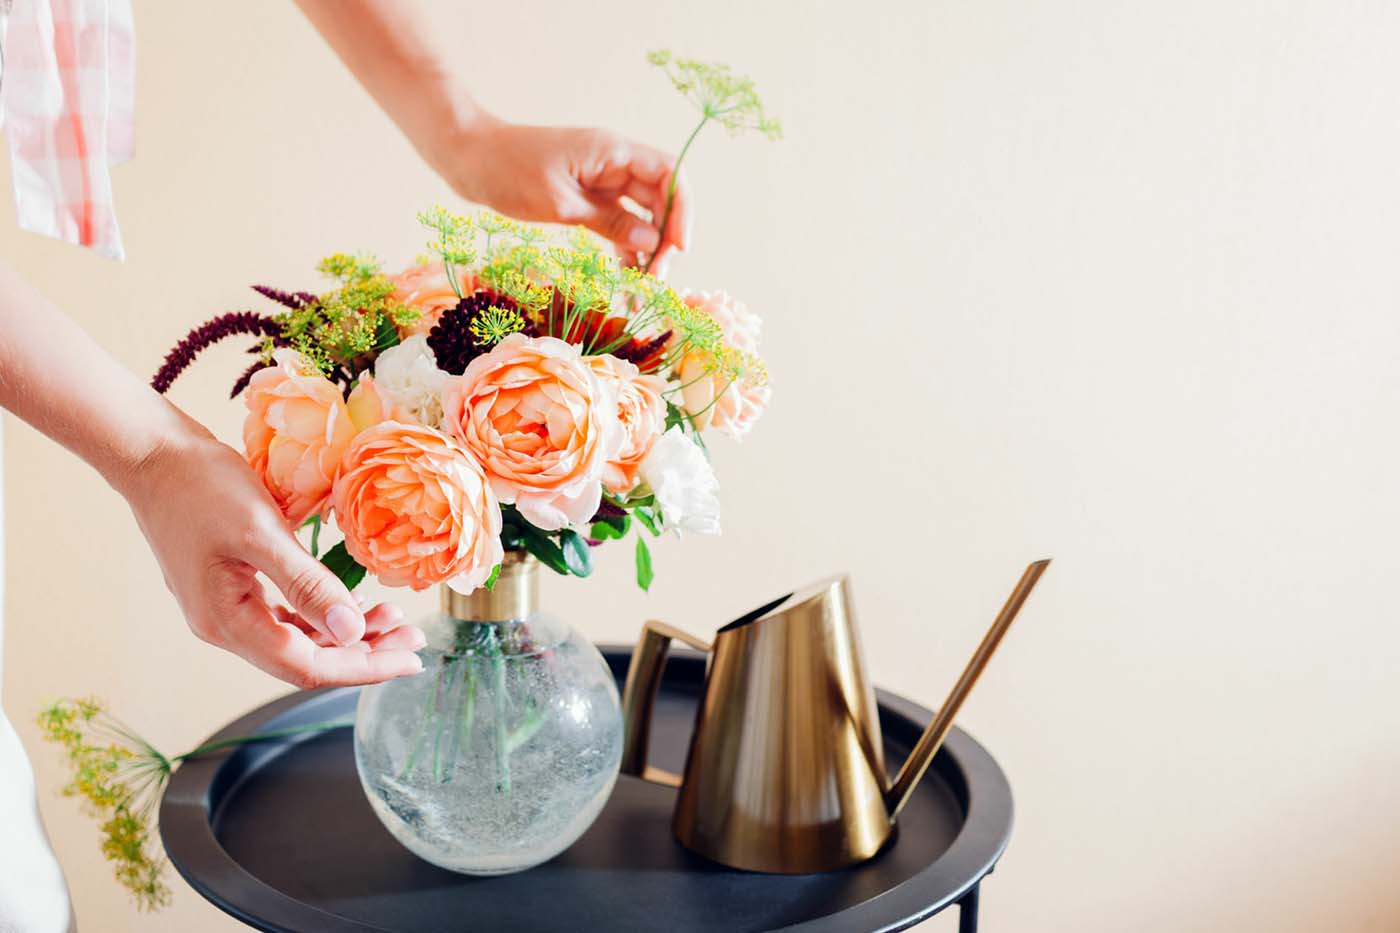 Tips for Flower Care: How to Care For and Prolong the Life of Cut Flowers